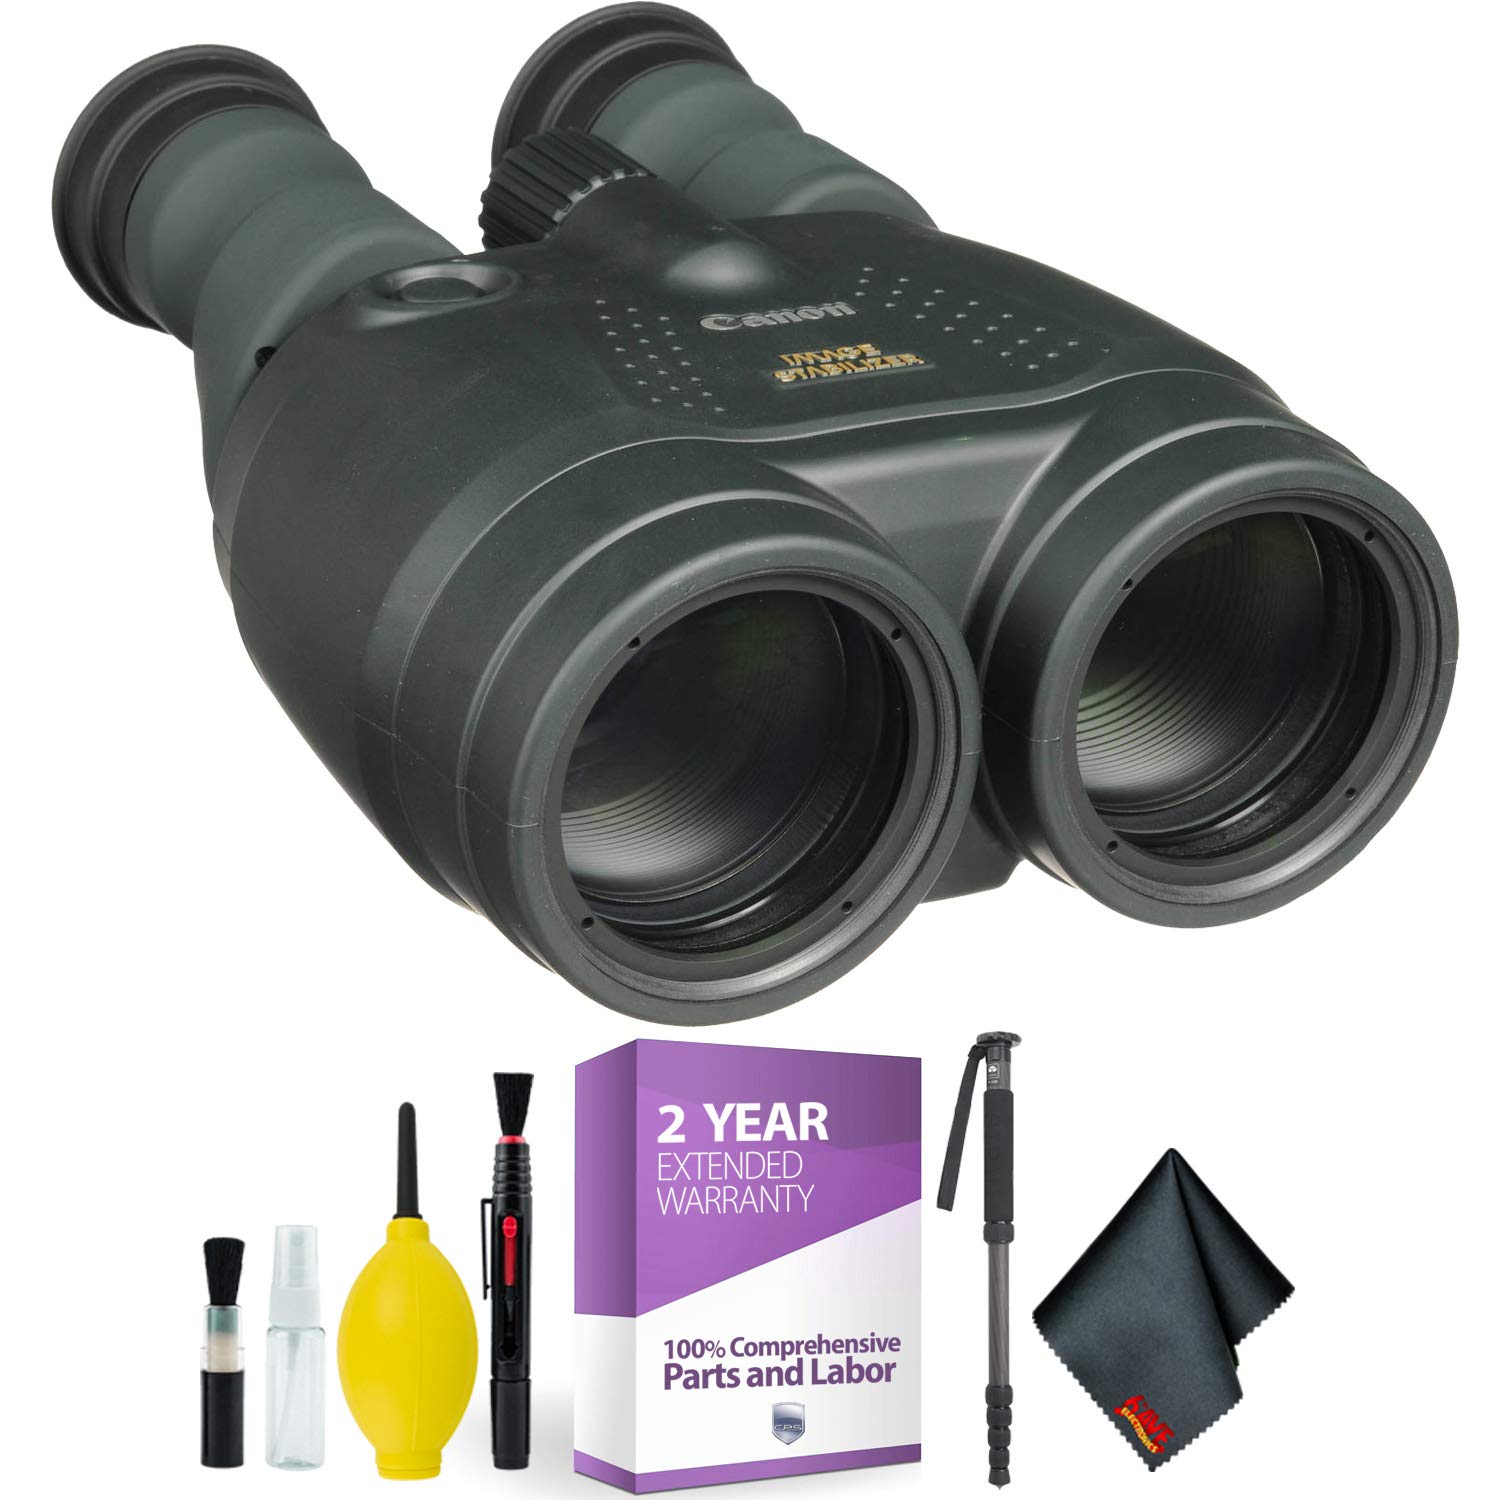 Canon 15x50 is All-Weather Image Stabilized Binocular + Cleaning Kit + 2 Year Extended Warranty Bundle